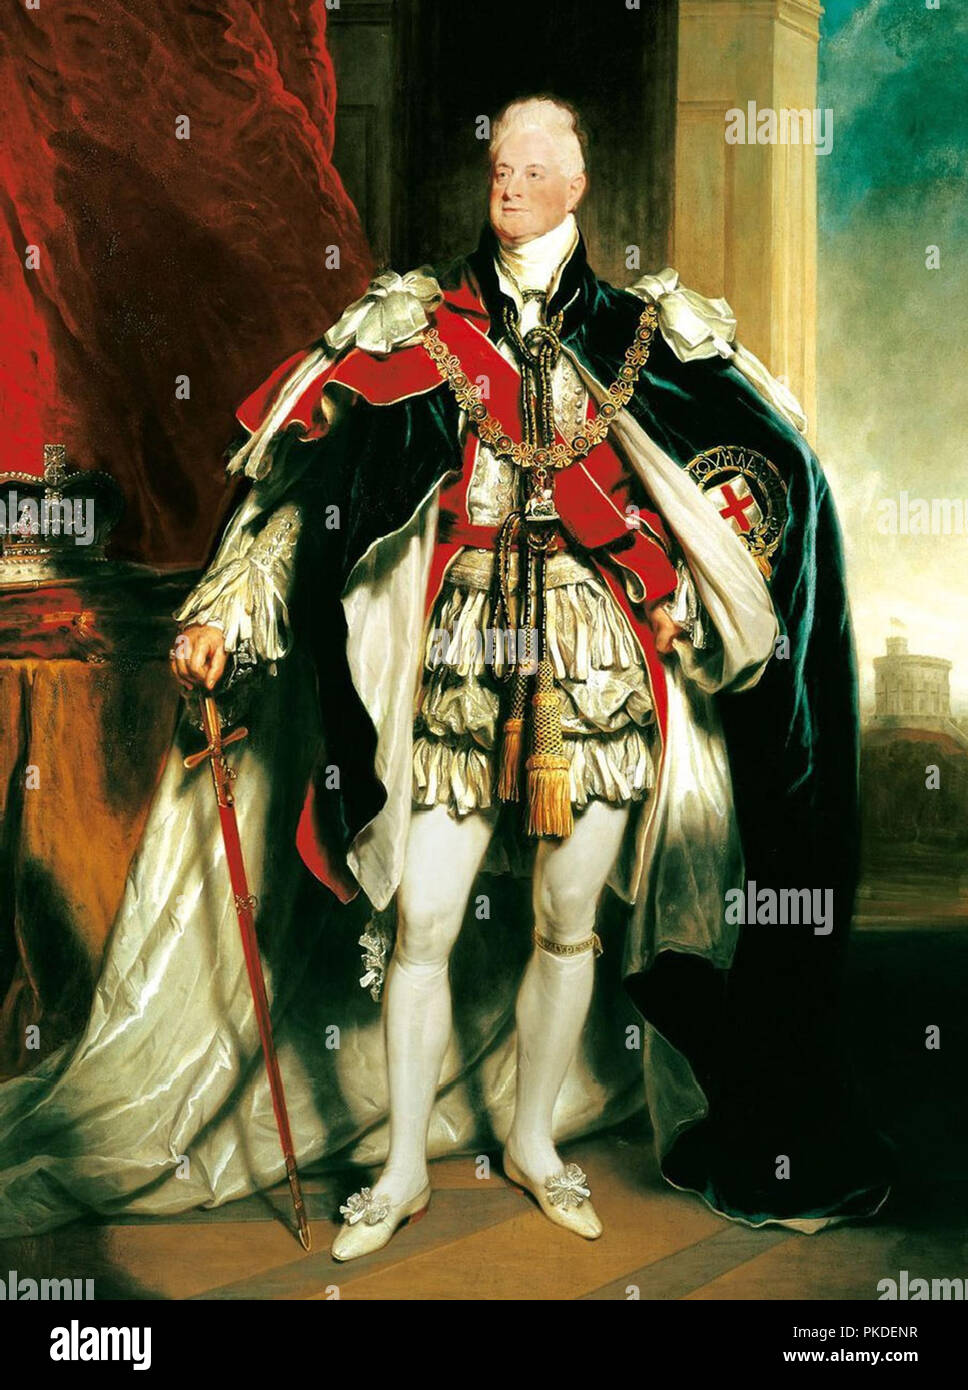 King William IV (1765 – 1837) King of the United Kingdom of Great Britain and Ireland and King of Hanover from 26 June 1830 until his death in 1837 Stock Photo